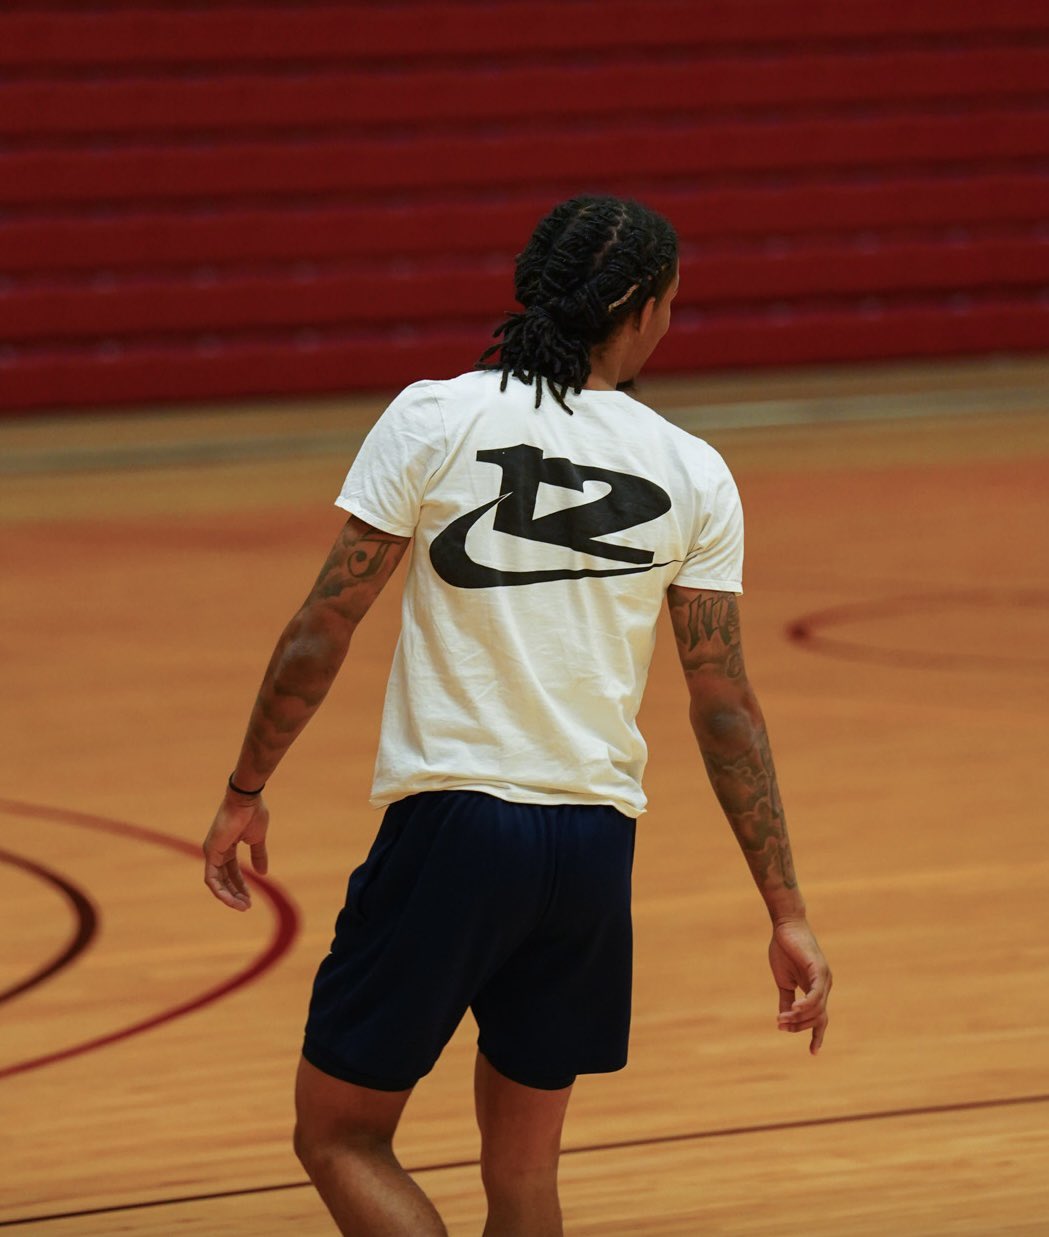 Nick DePaula on X: Ja Morant debuts his new “JA 12” personal logo as he  arrives in Orlando. He and several players spent their quarantine break  working on personal branding concepts &